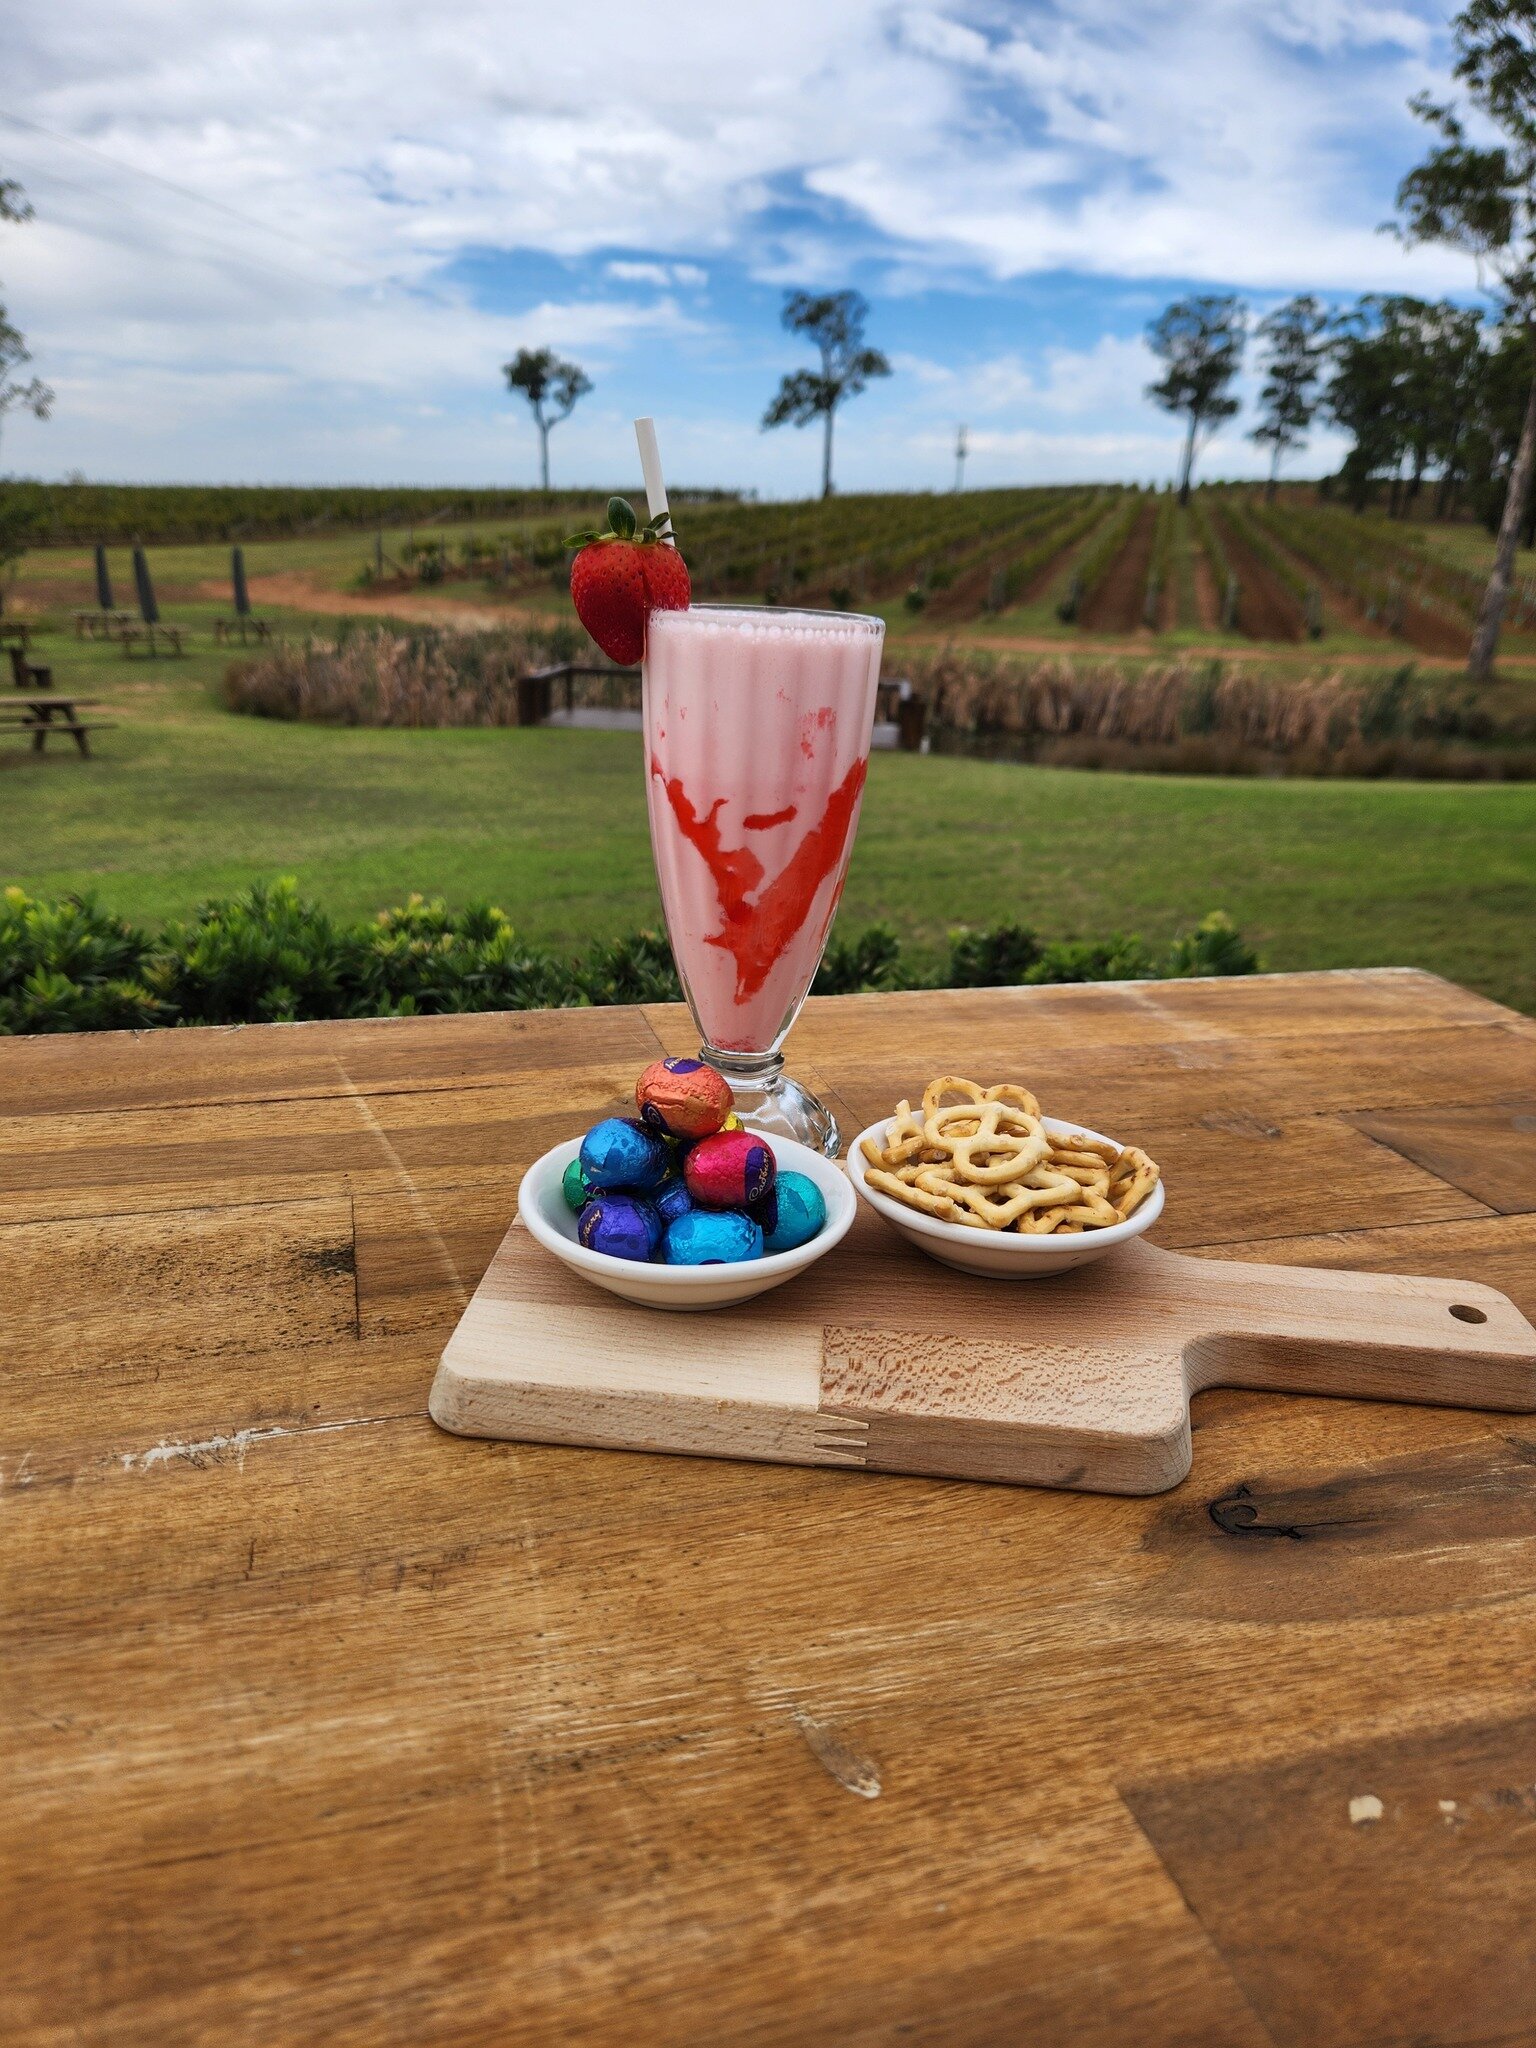 Don't forget the kids this Easter Weekend! We have a Easter tasting board for just $5 in our Cellar Door.
Plus, the Easter Bunny is coming early to RidgeView with a Easter Egg Hunt in our Veggie Garden on Good Friday, Easter Saturday and Easter Sunda